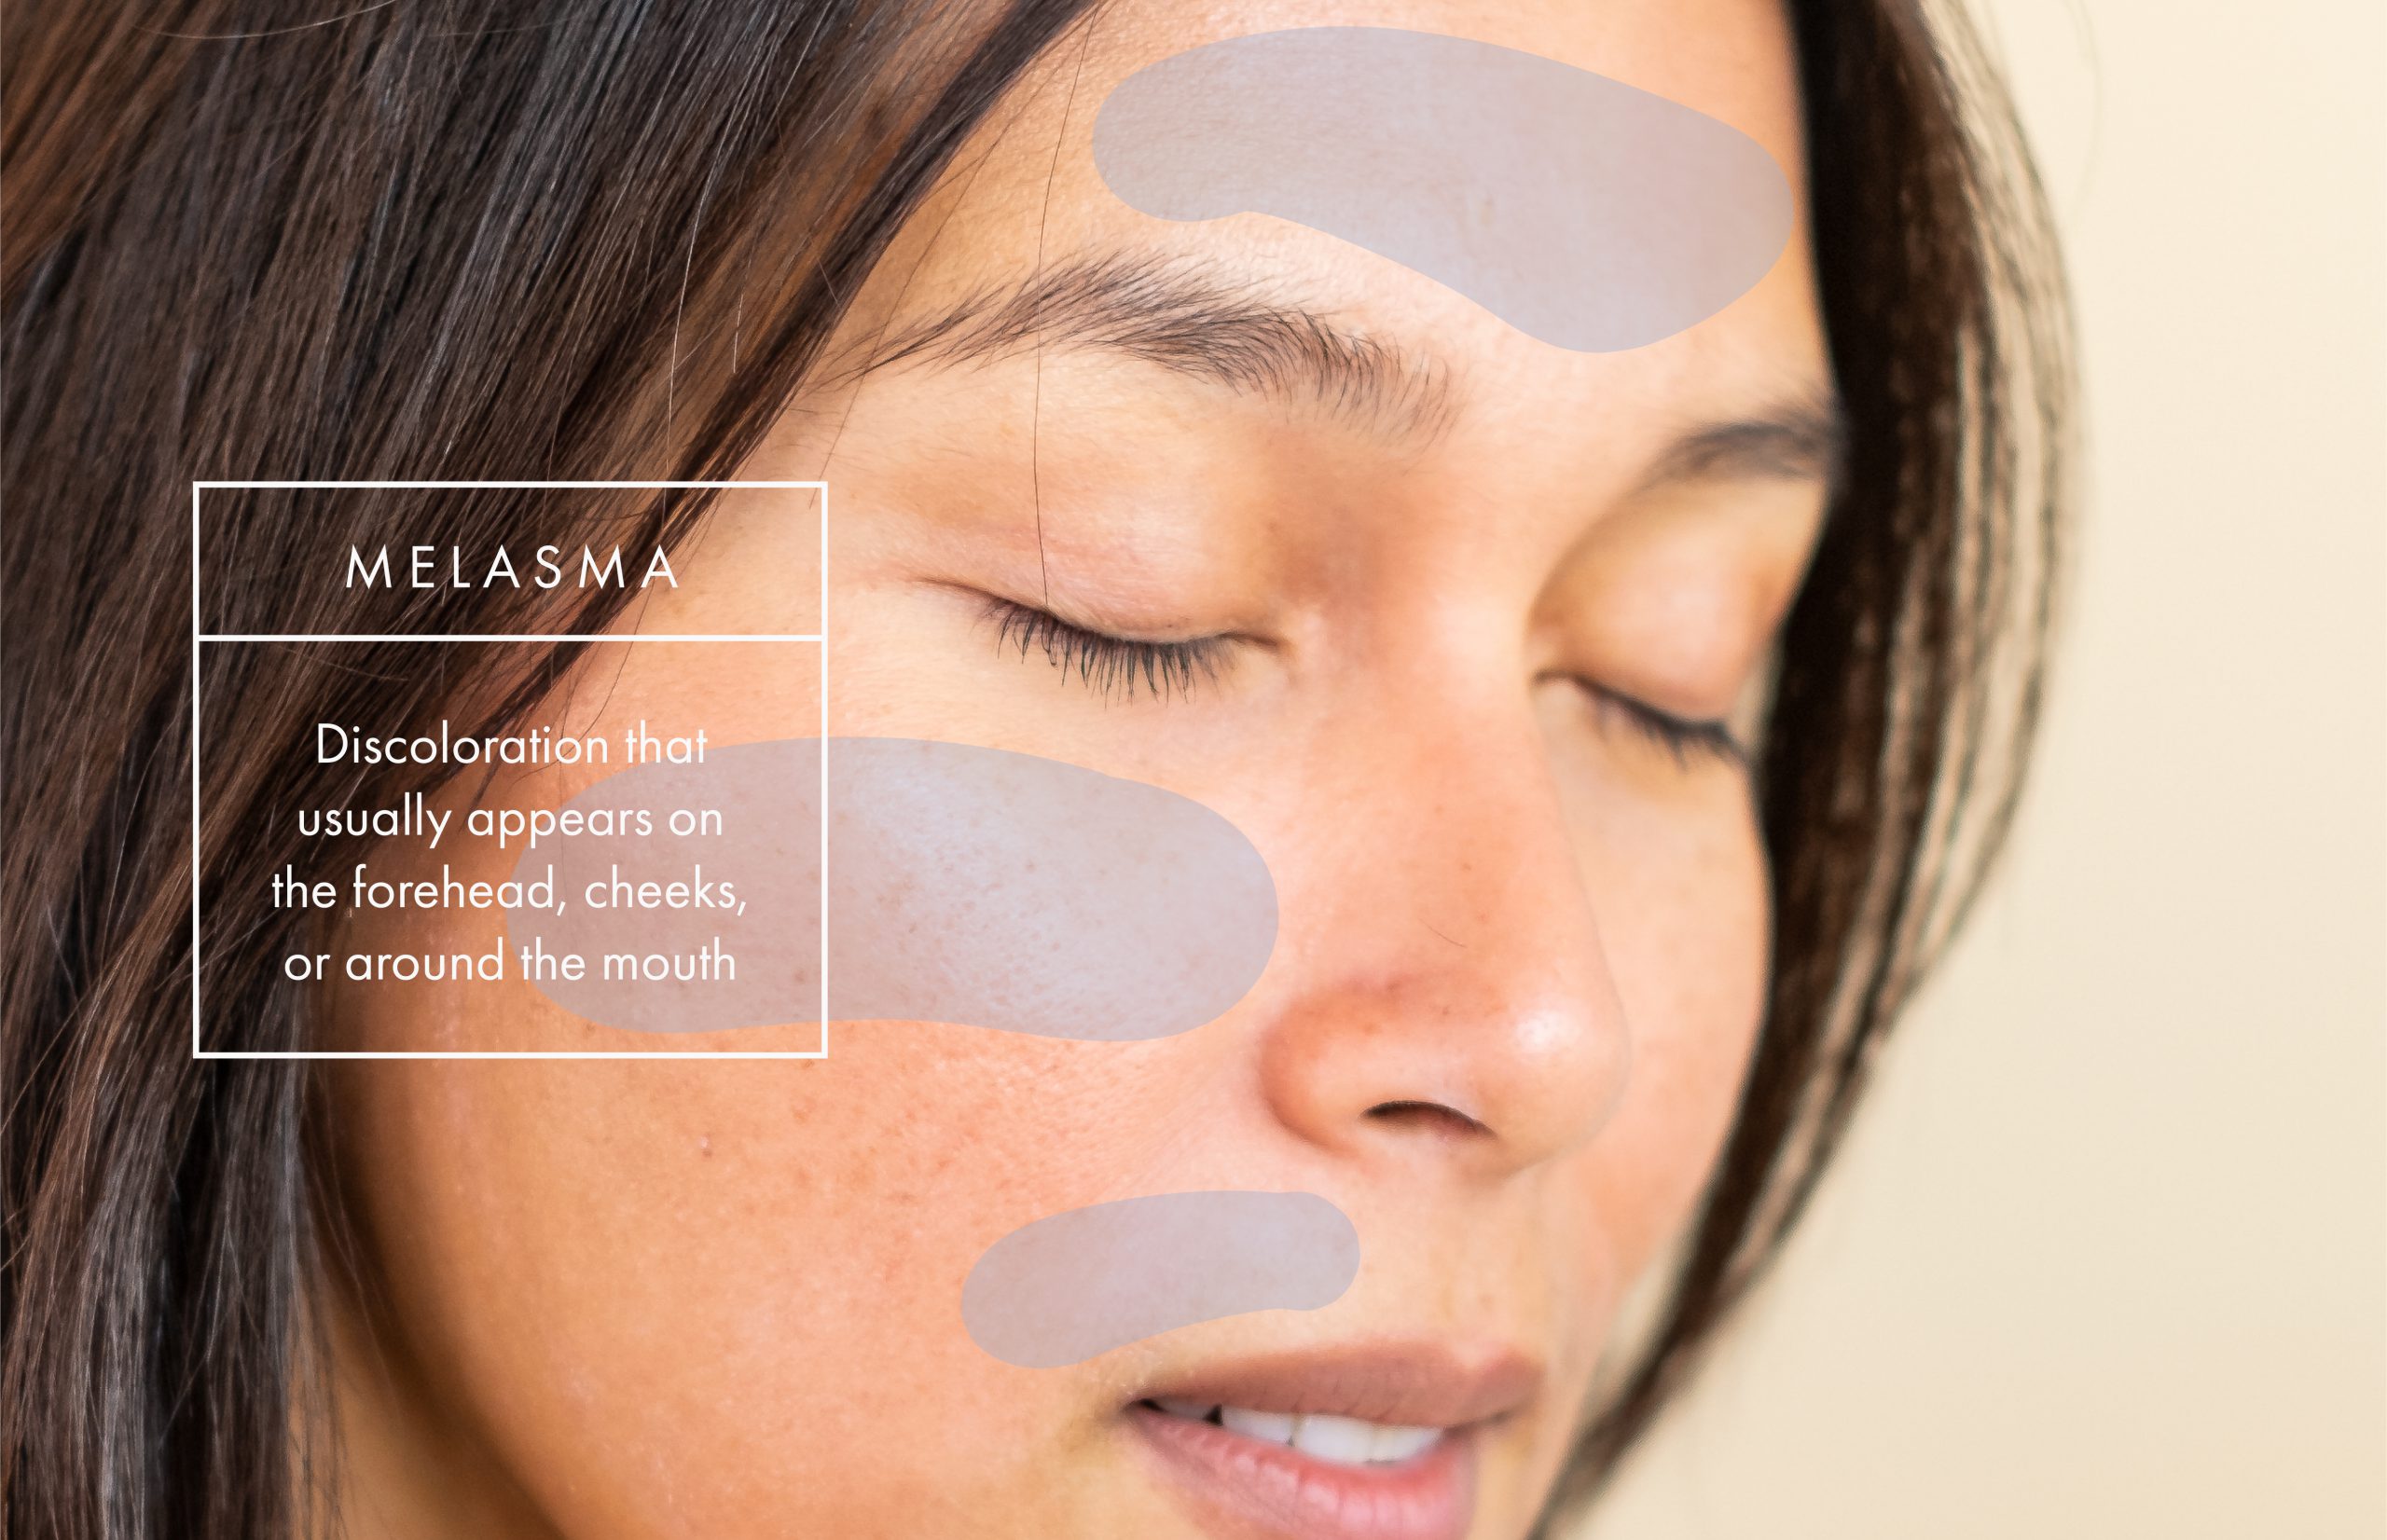 Skin Discoloration Has Many Causes—and Just As Many Treatment Options